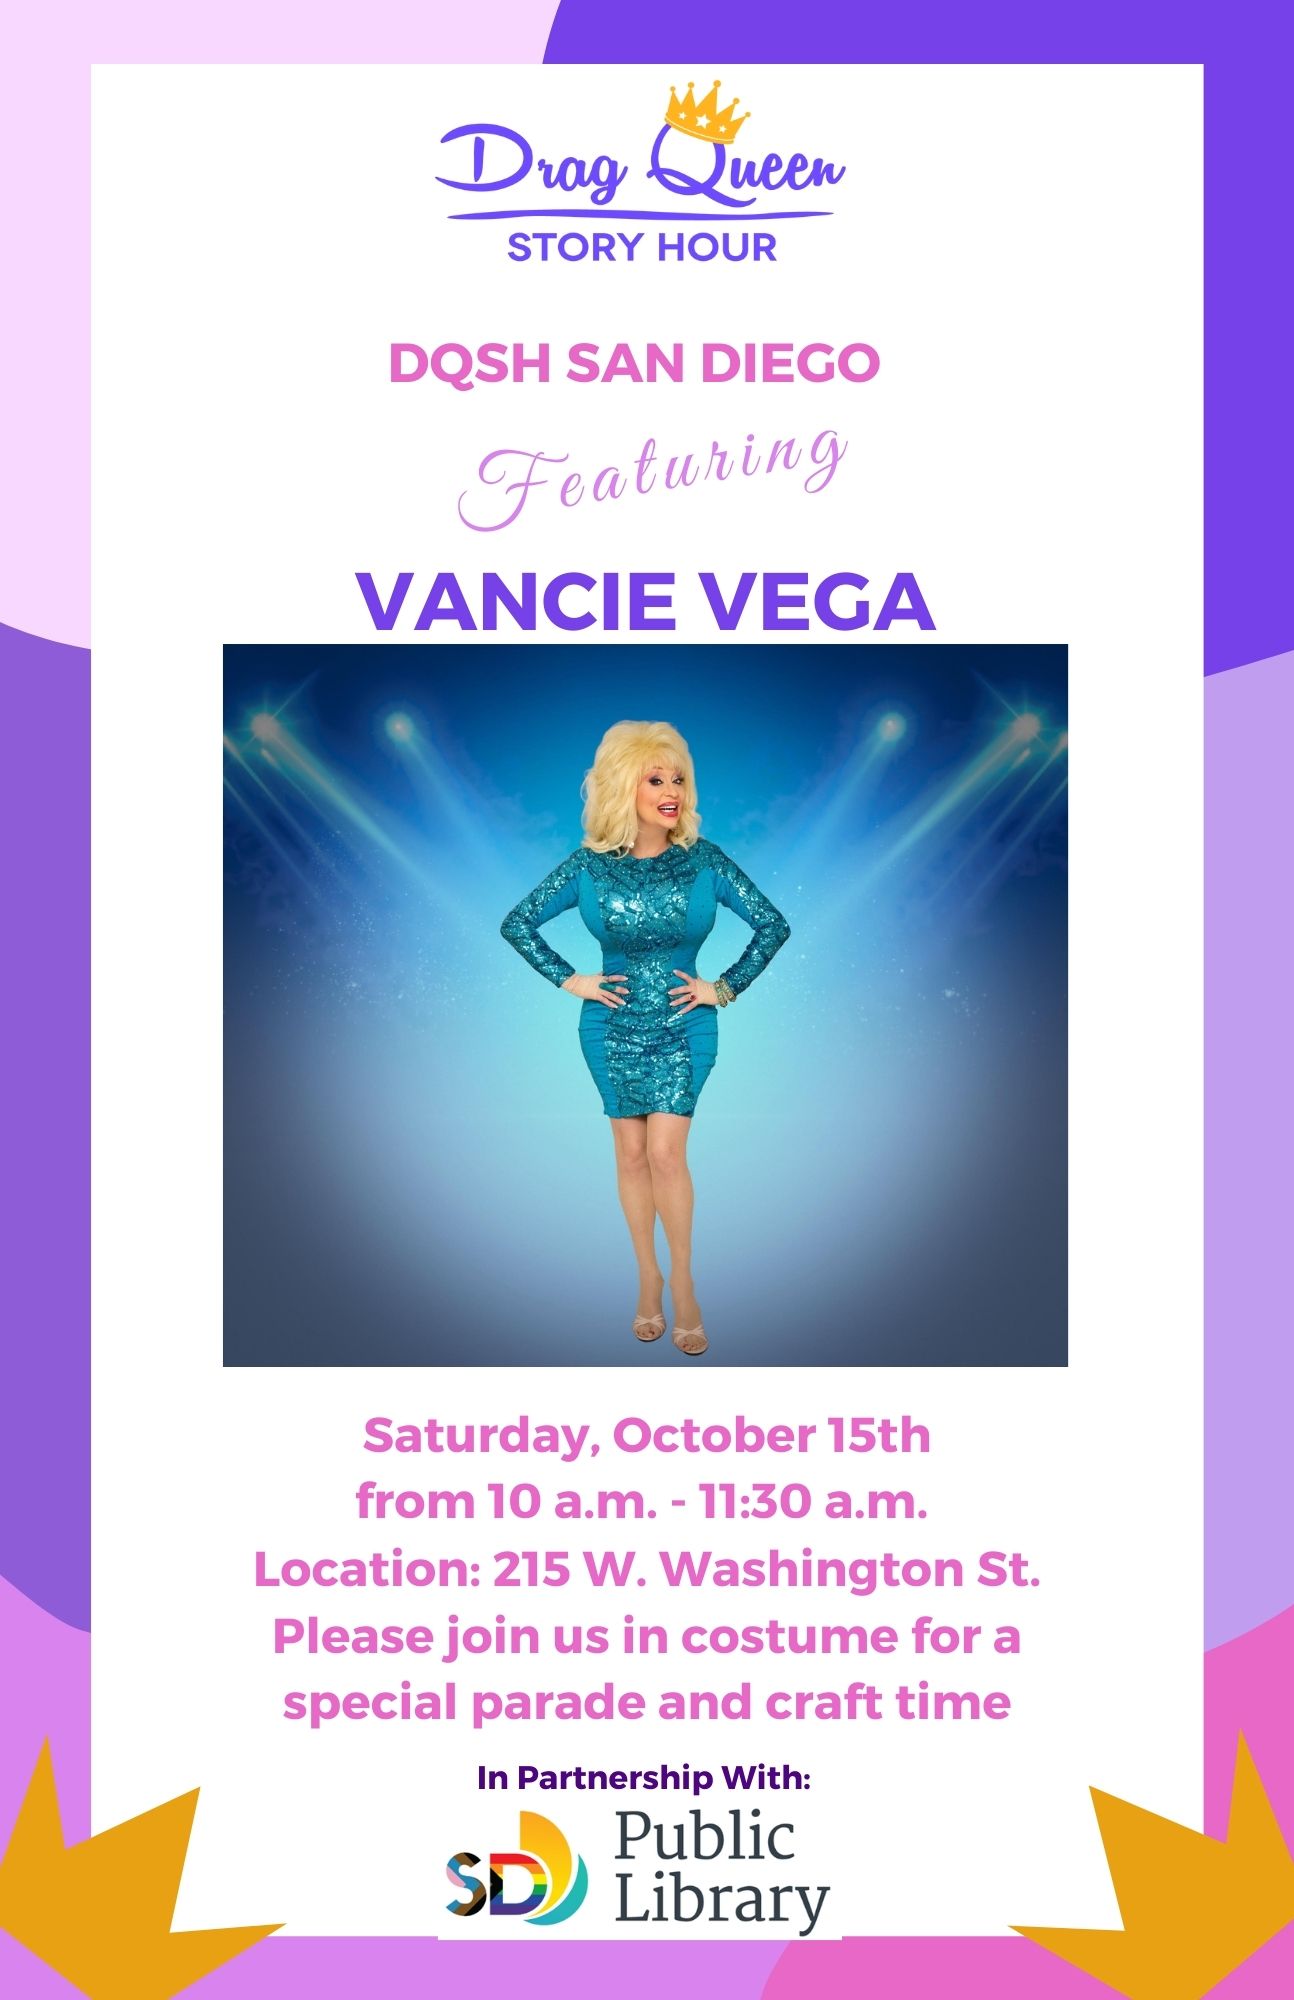 Flyer of Drag Queen Story Hour, a mutli-colored border in light pink, dark purple, orange, and light purple. In the center is an image of Vancie Vegas in a blond wig and bright sparkly blue dress, dressed up as Dolly Parton.  